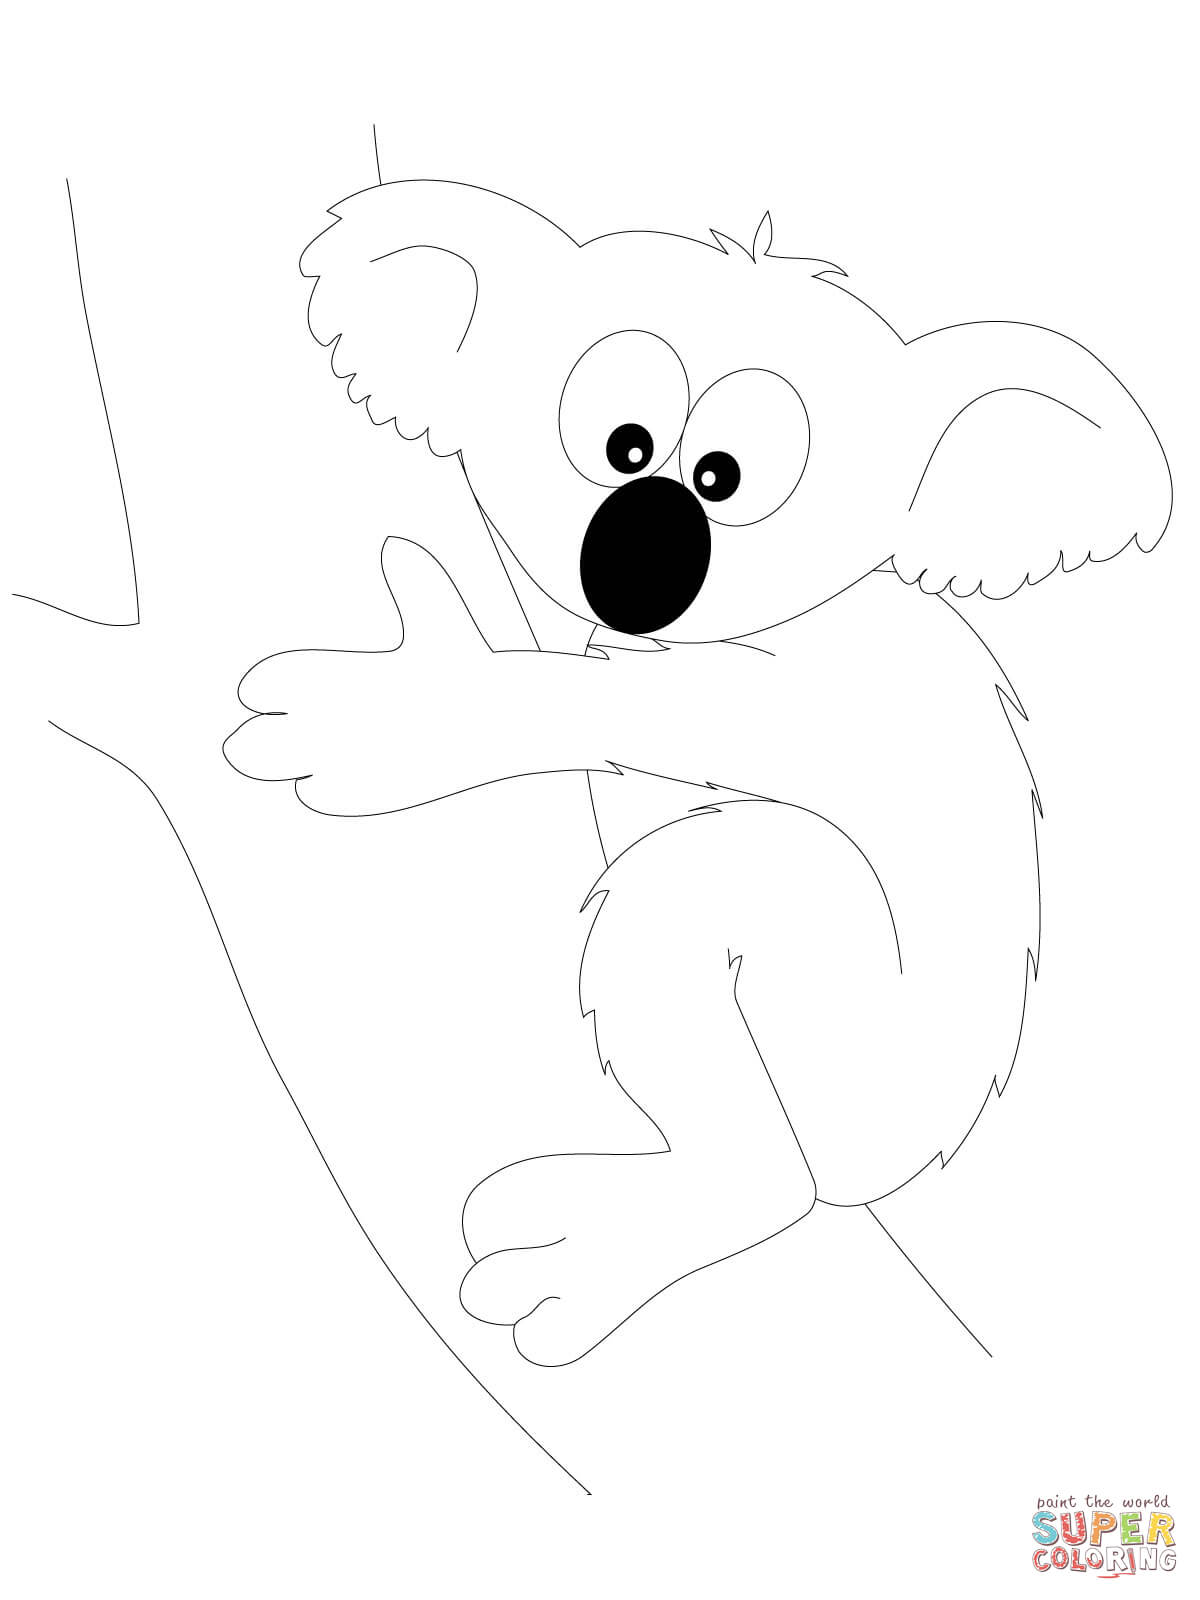 Koalas coloring pages | Free Coloring Pages